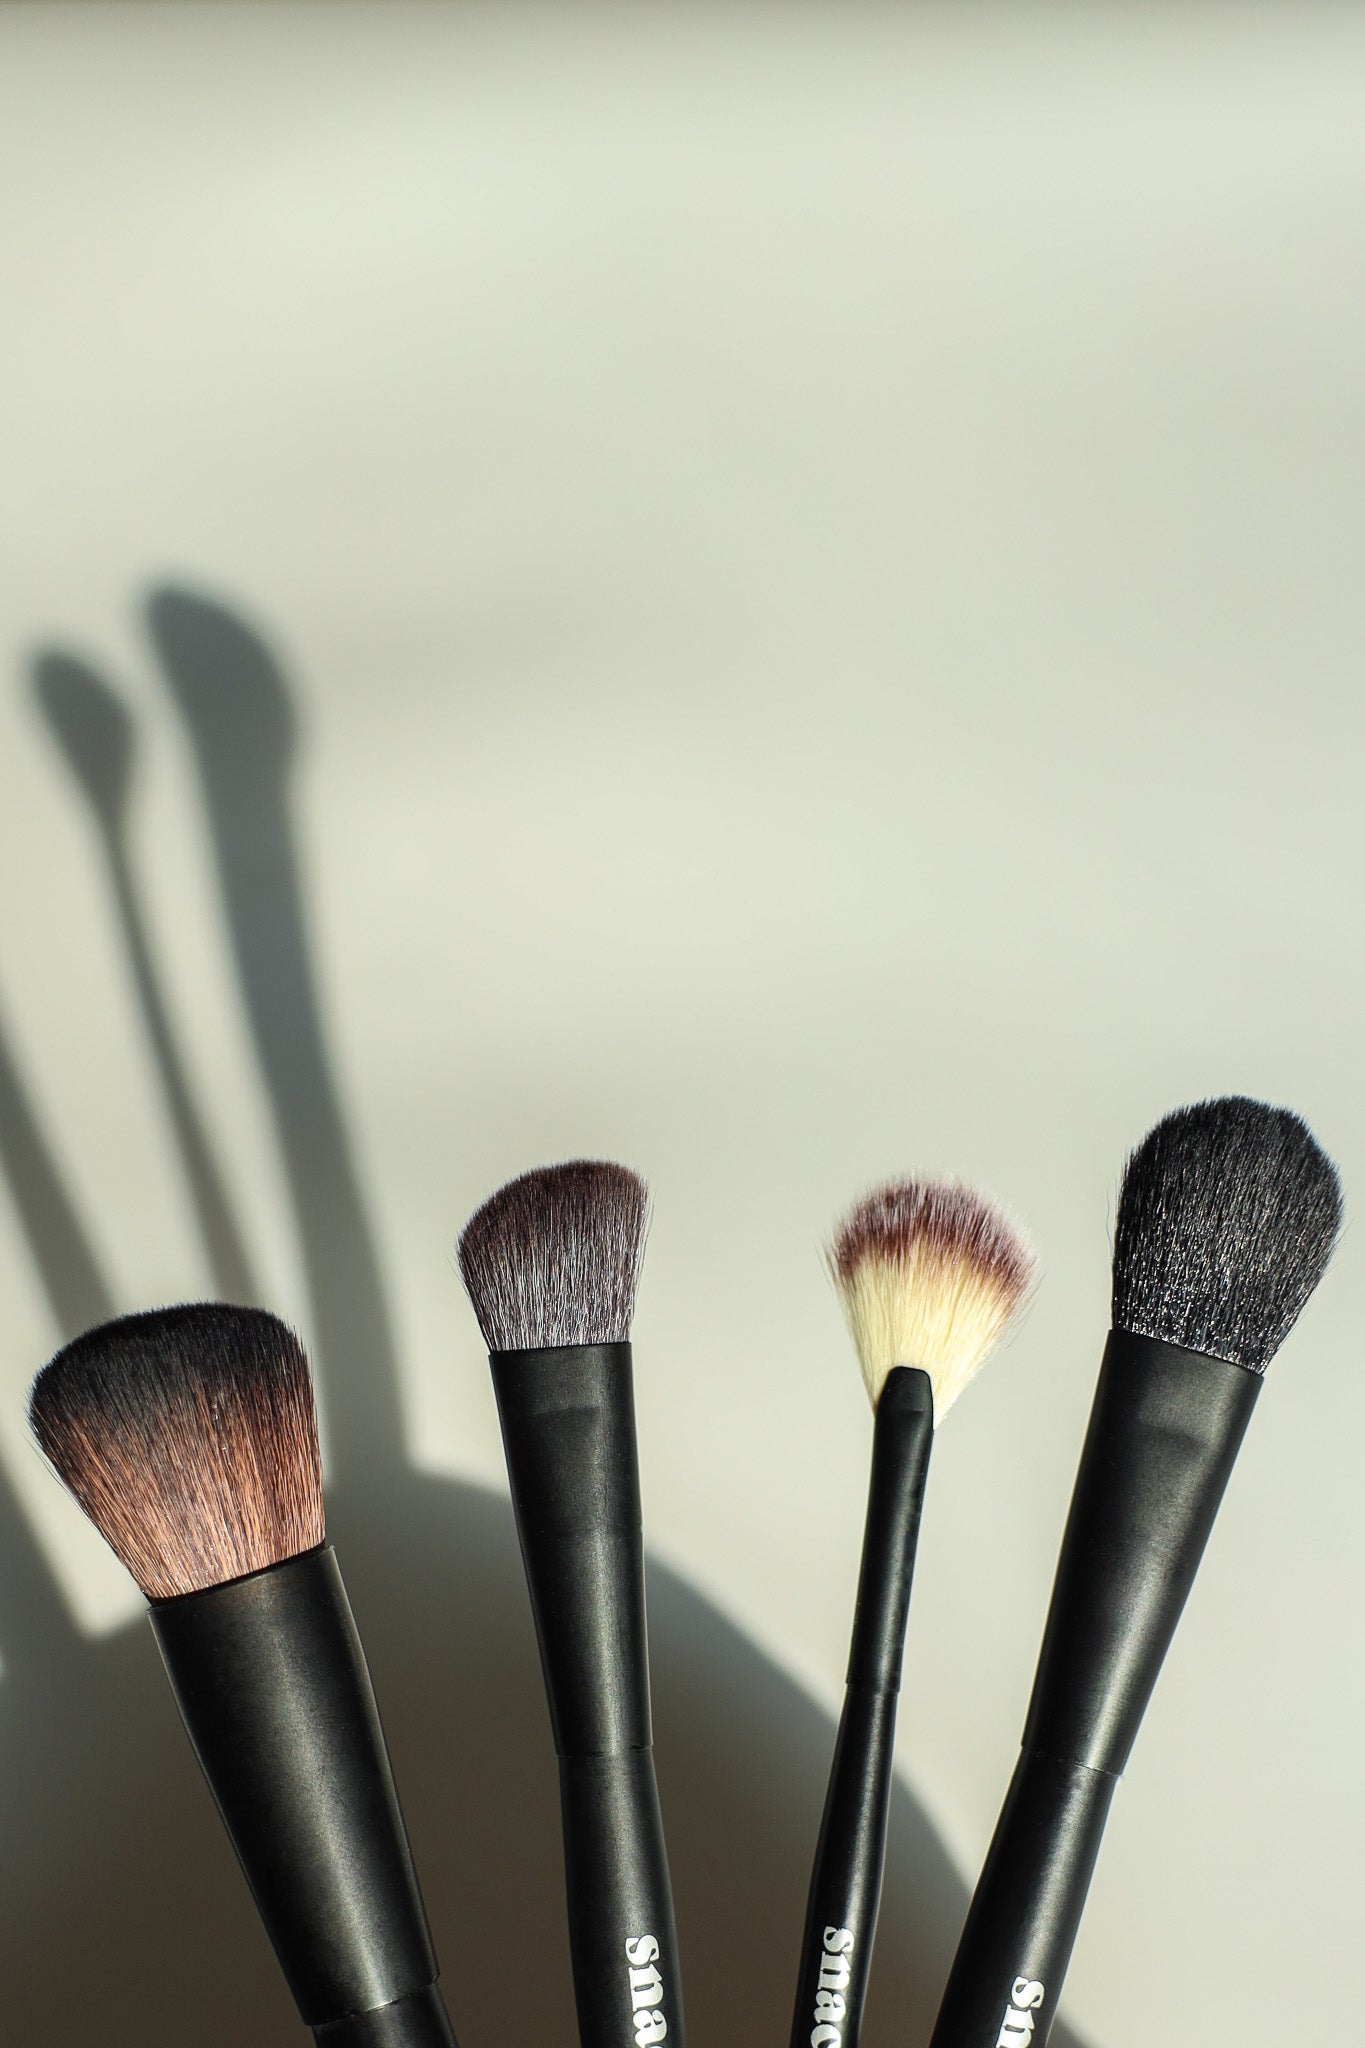 midnight snacc face makeup brushes - set of 4 brushes